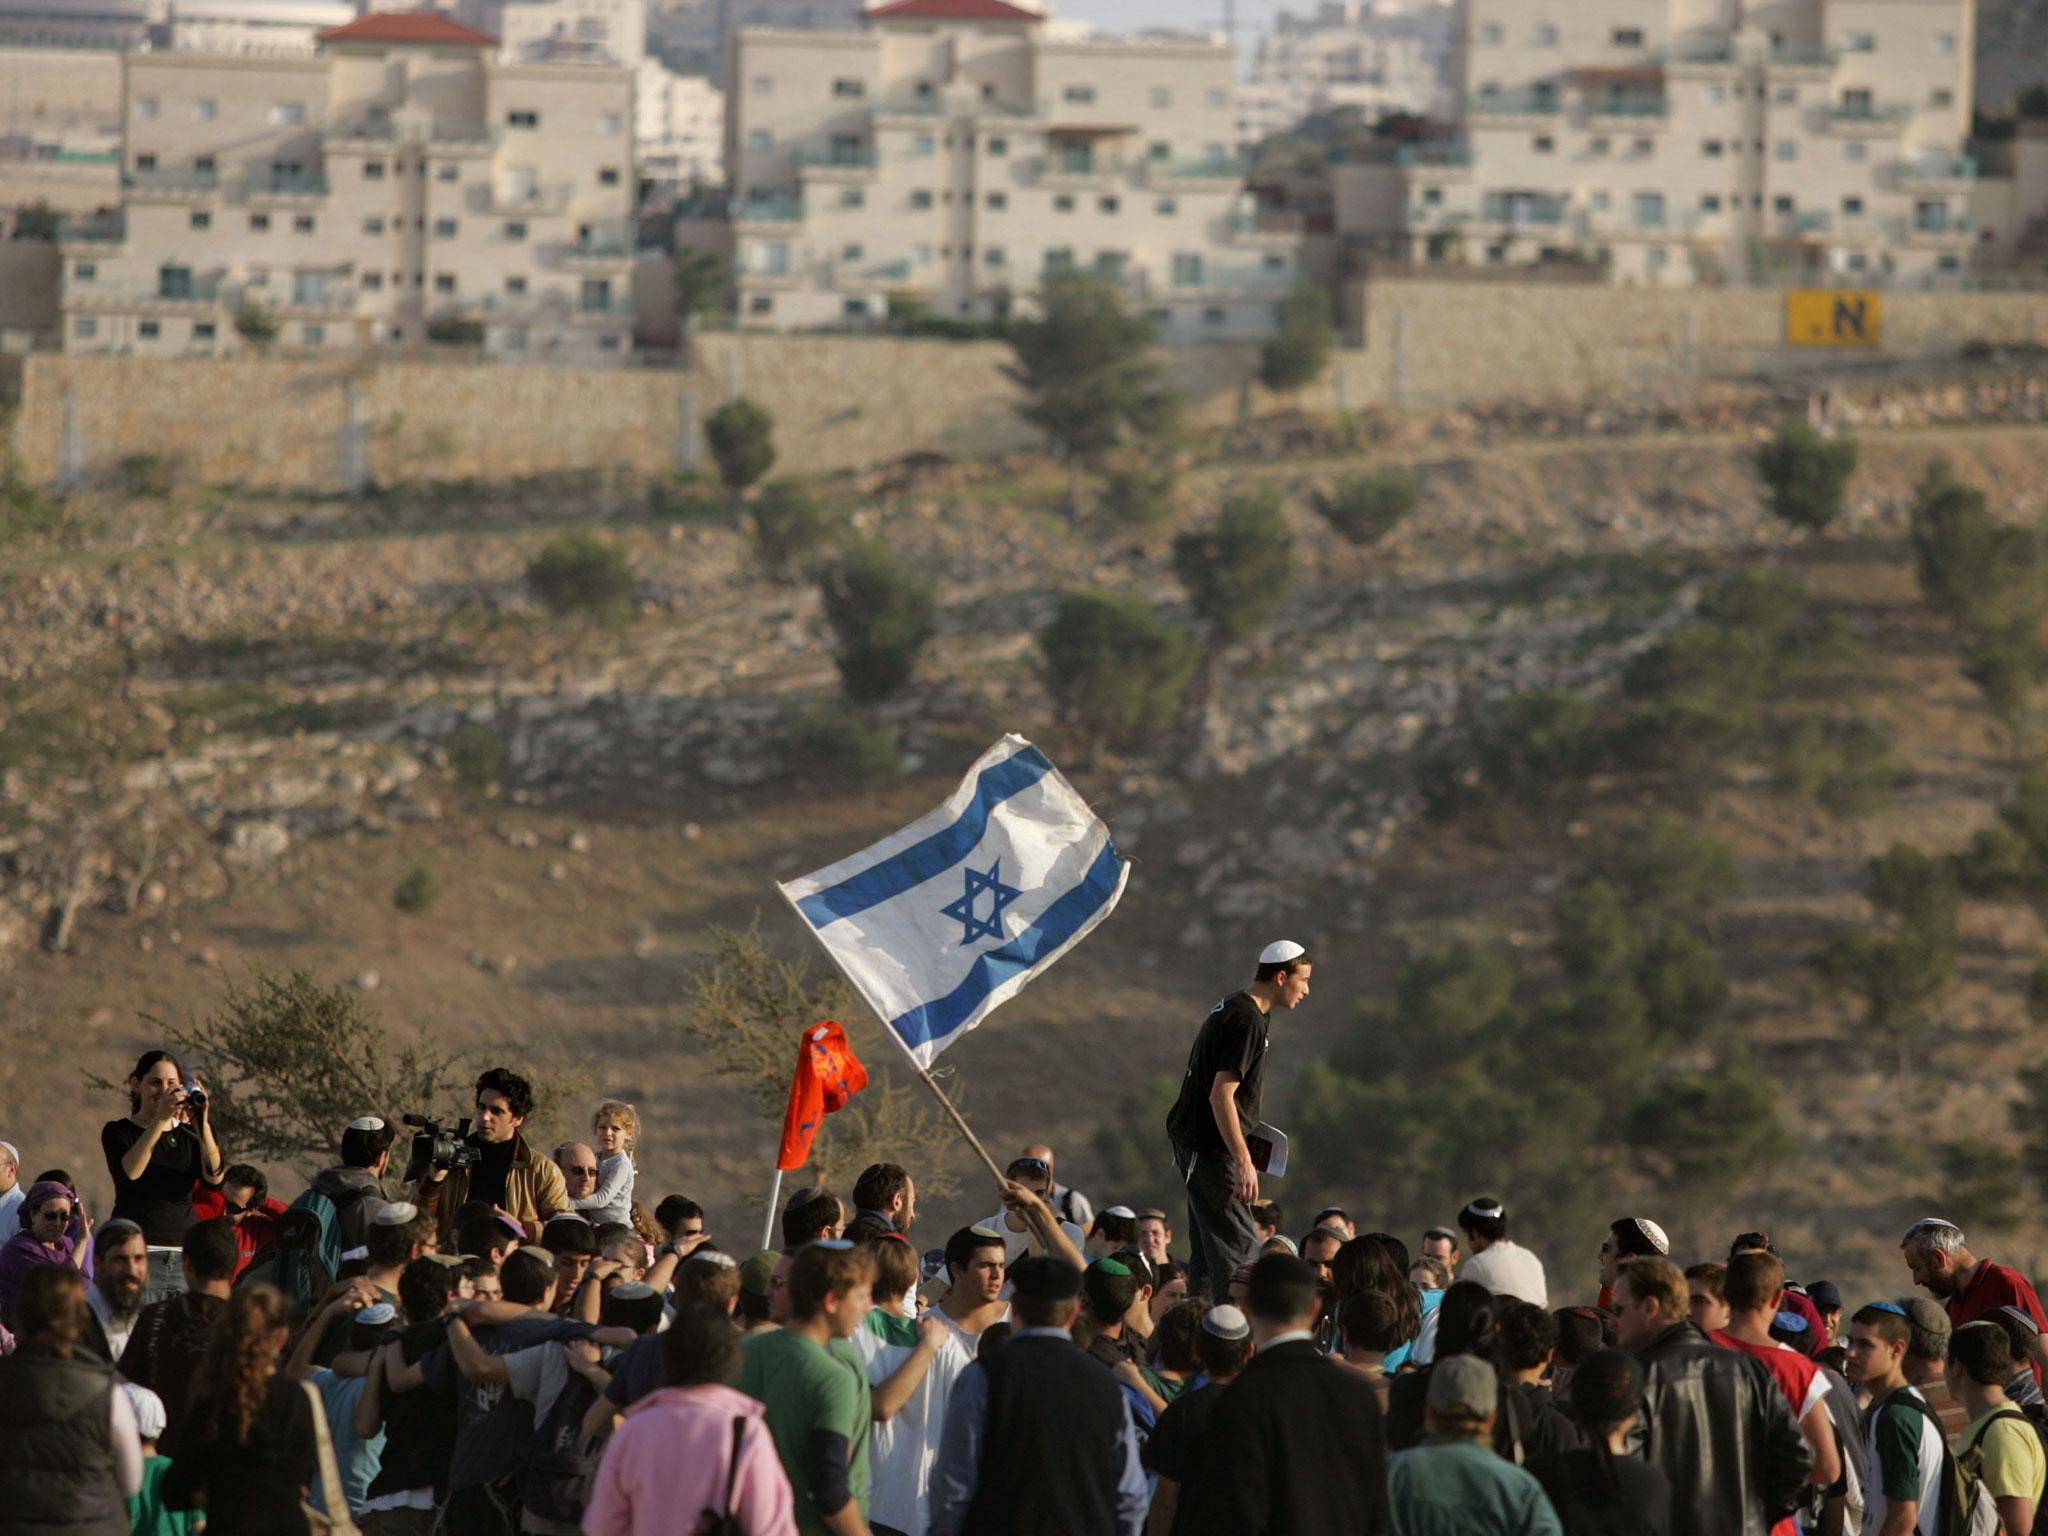 Israeli settlers dance and sing near the Israeli settlement of Maale Adumim in the West Bank (file photo)